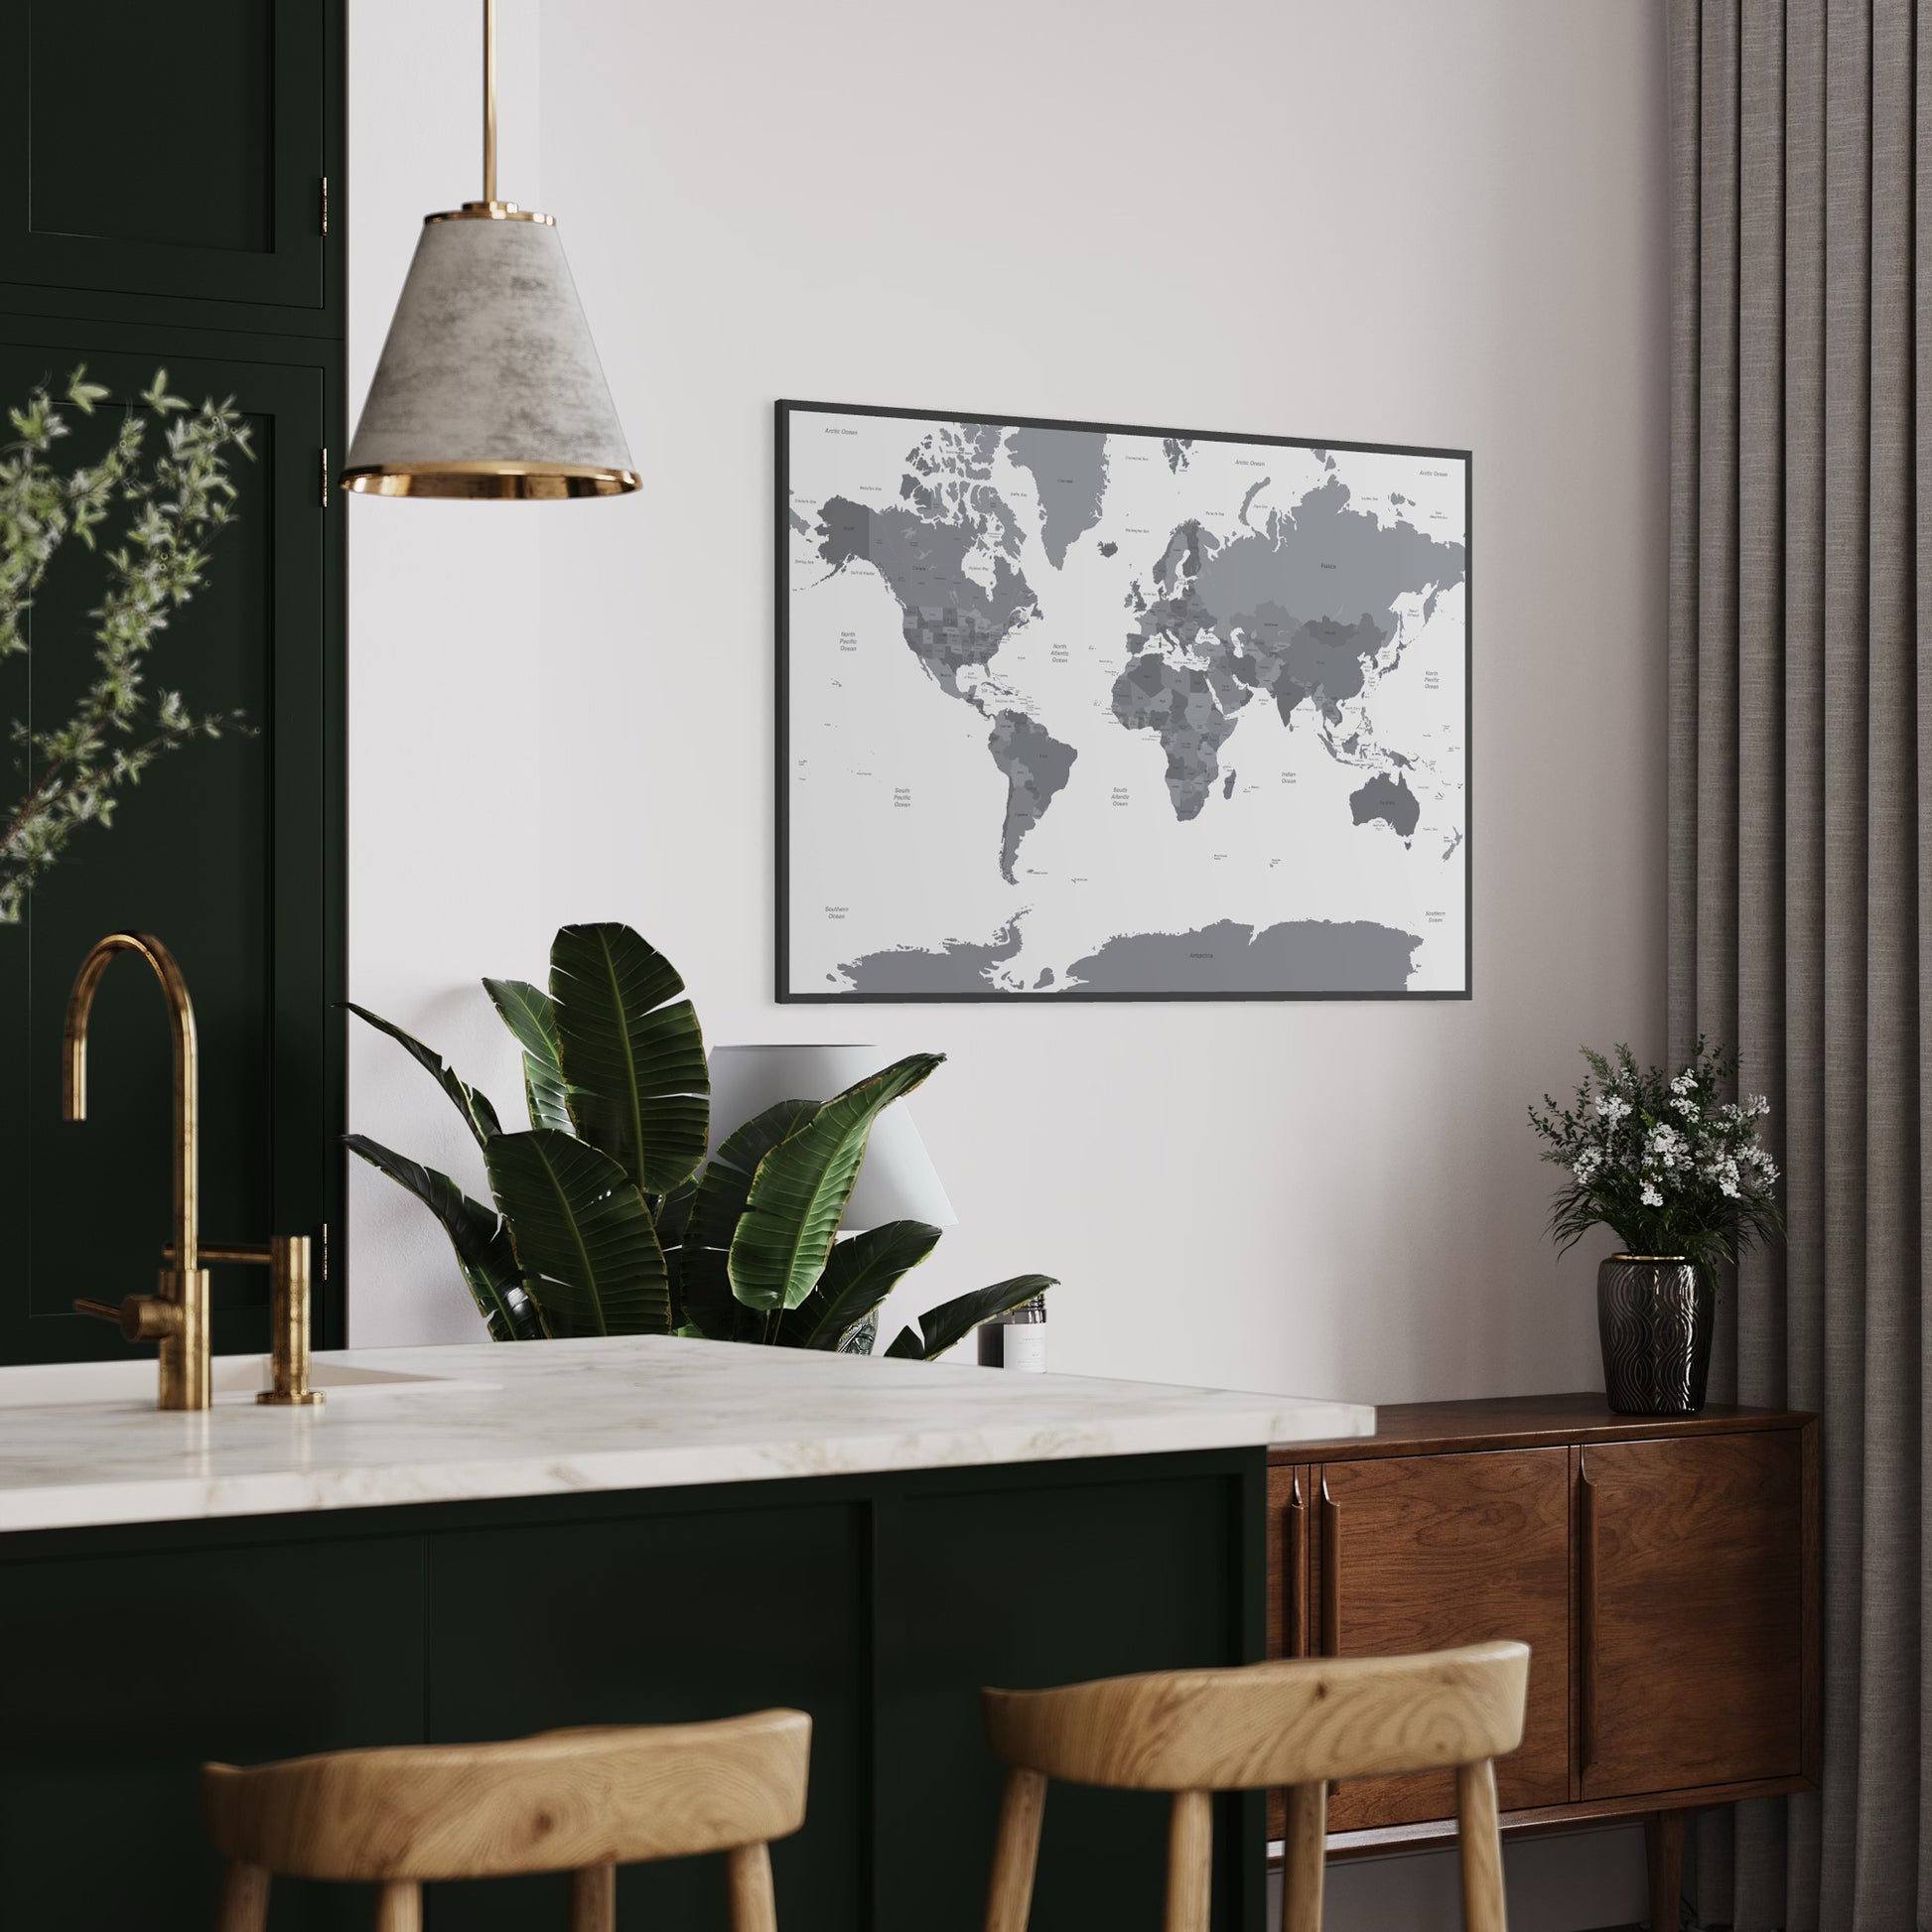 Grey Countries and White Sea Map of the World on Wall Above Sideboard